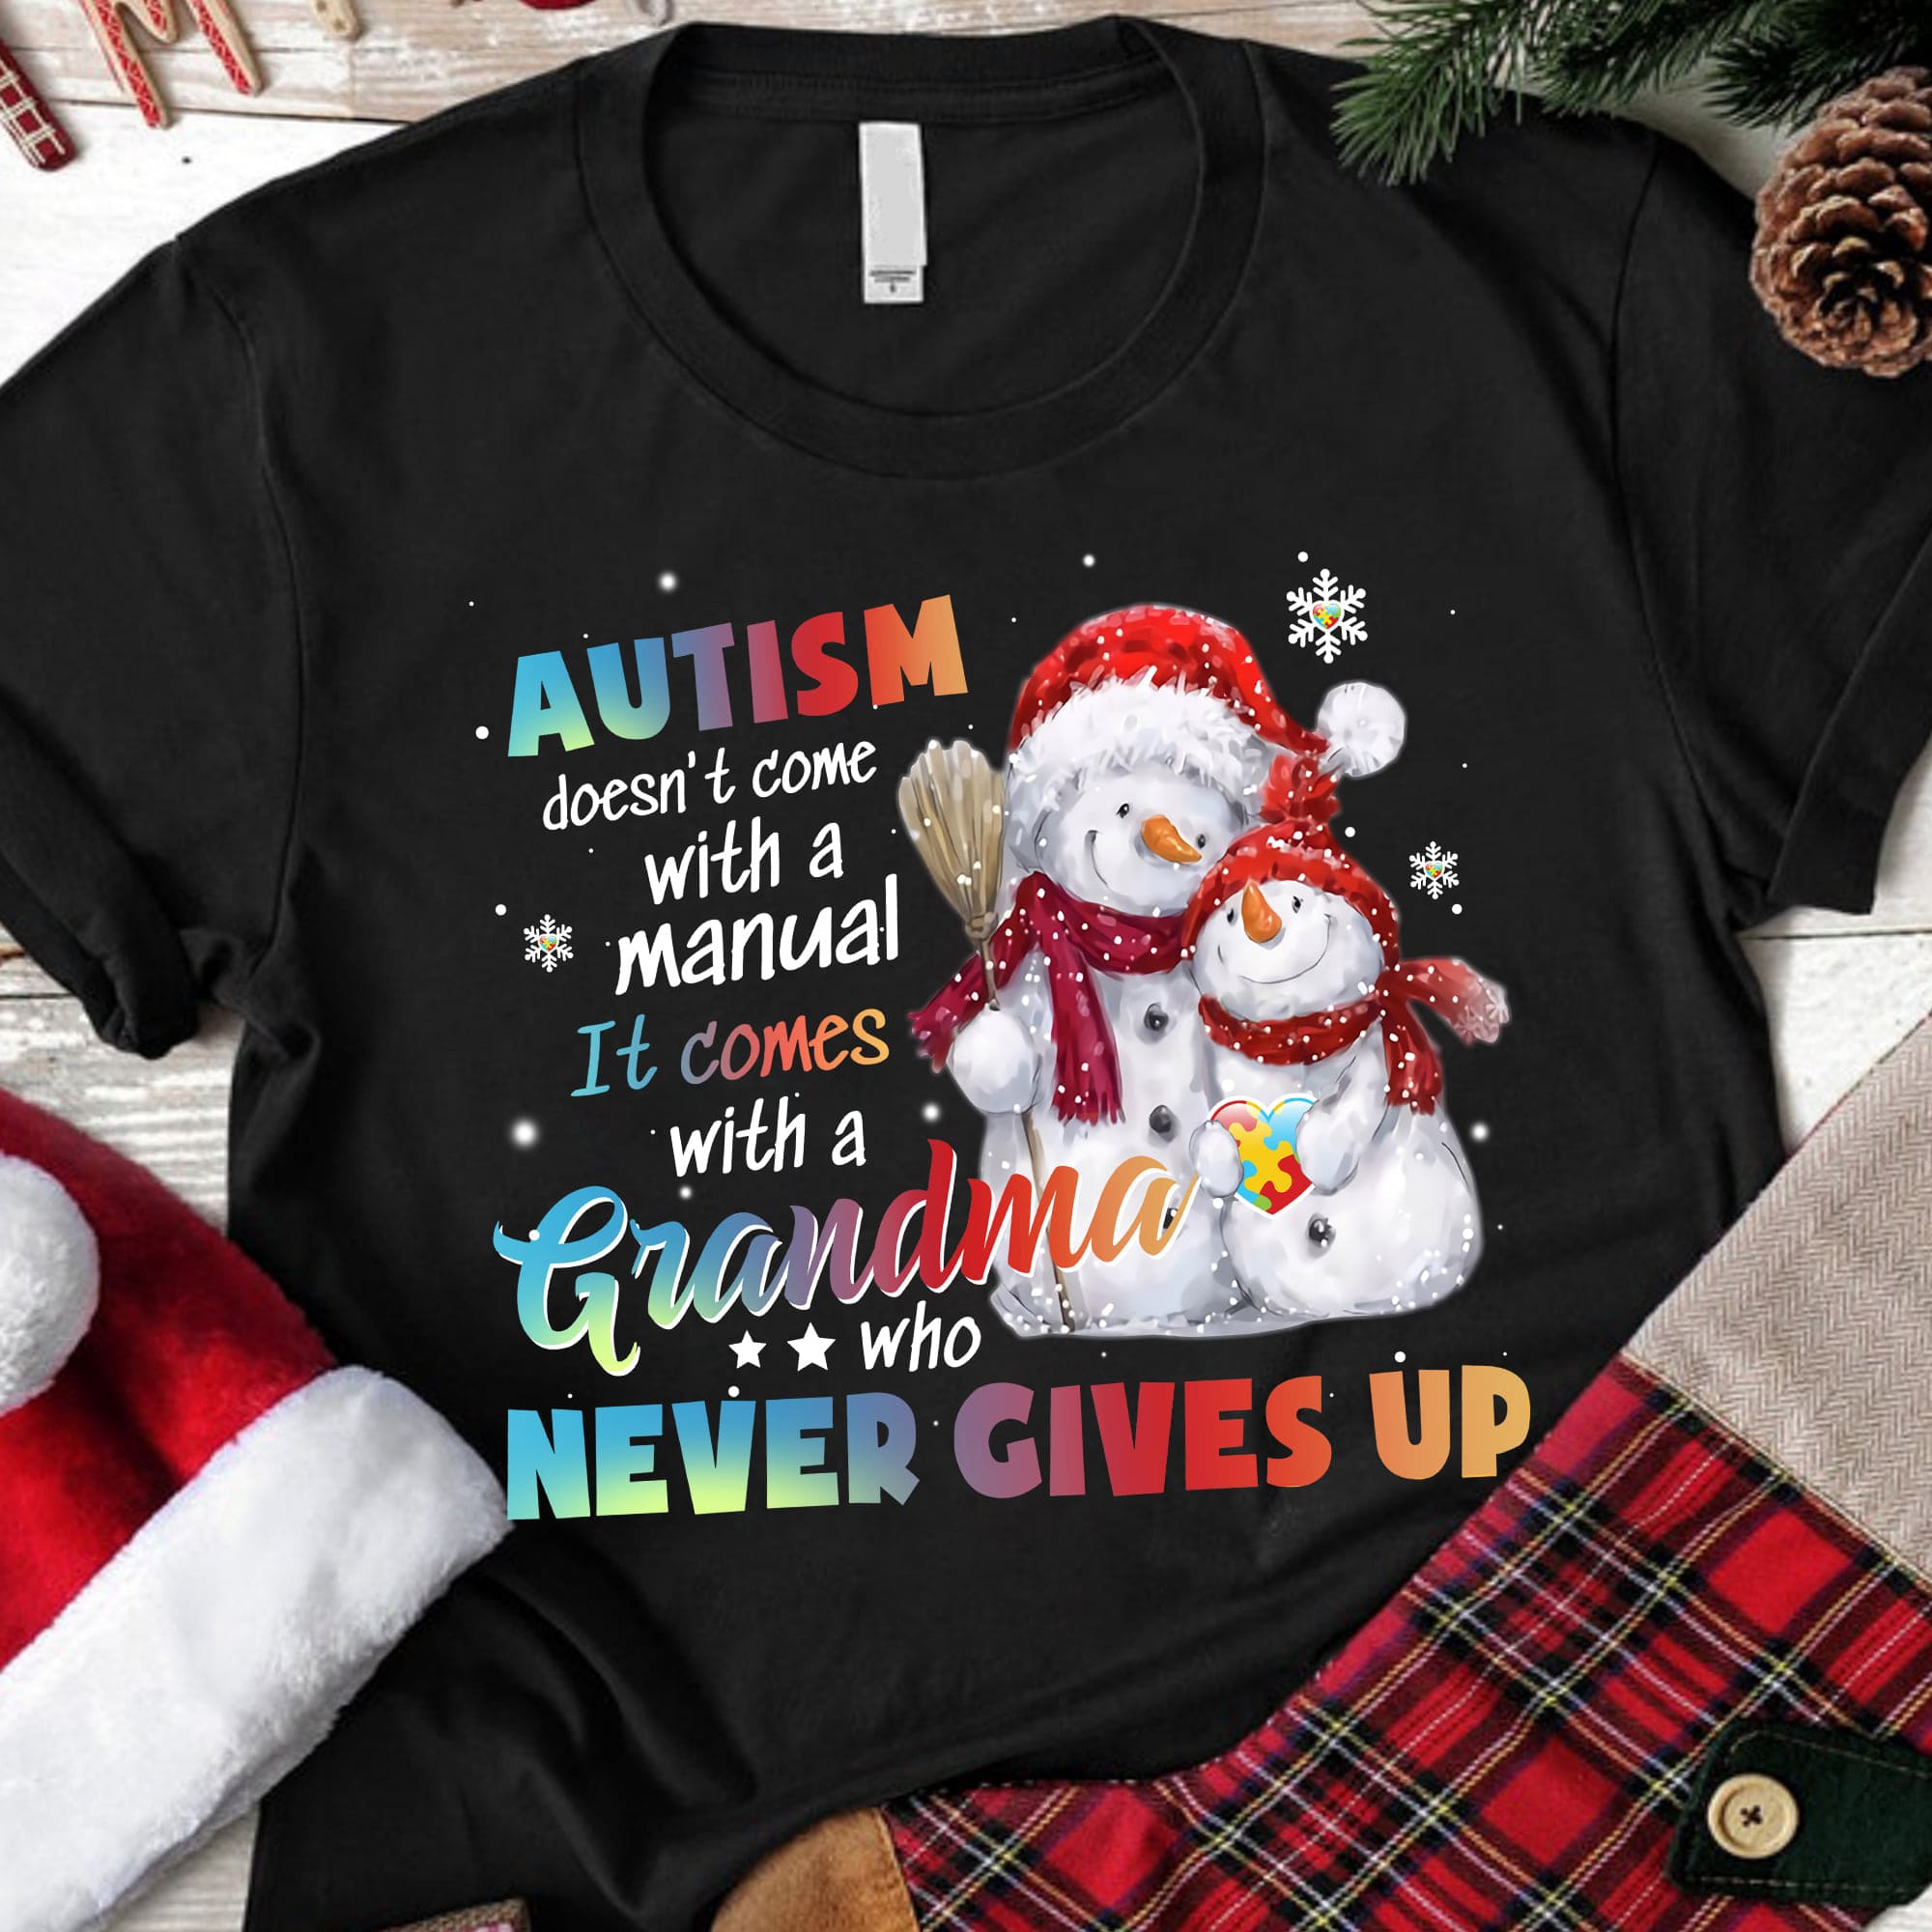 Autism doesn't come with a manual it comes with a grandma who never gives up - Snowman grandma, autism awareness